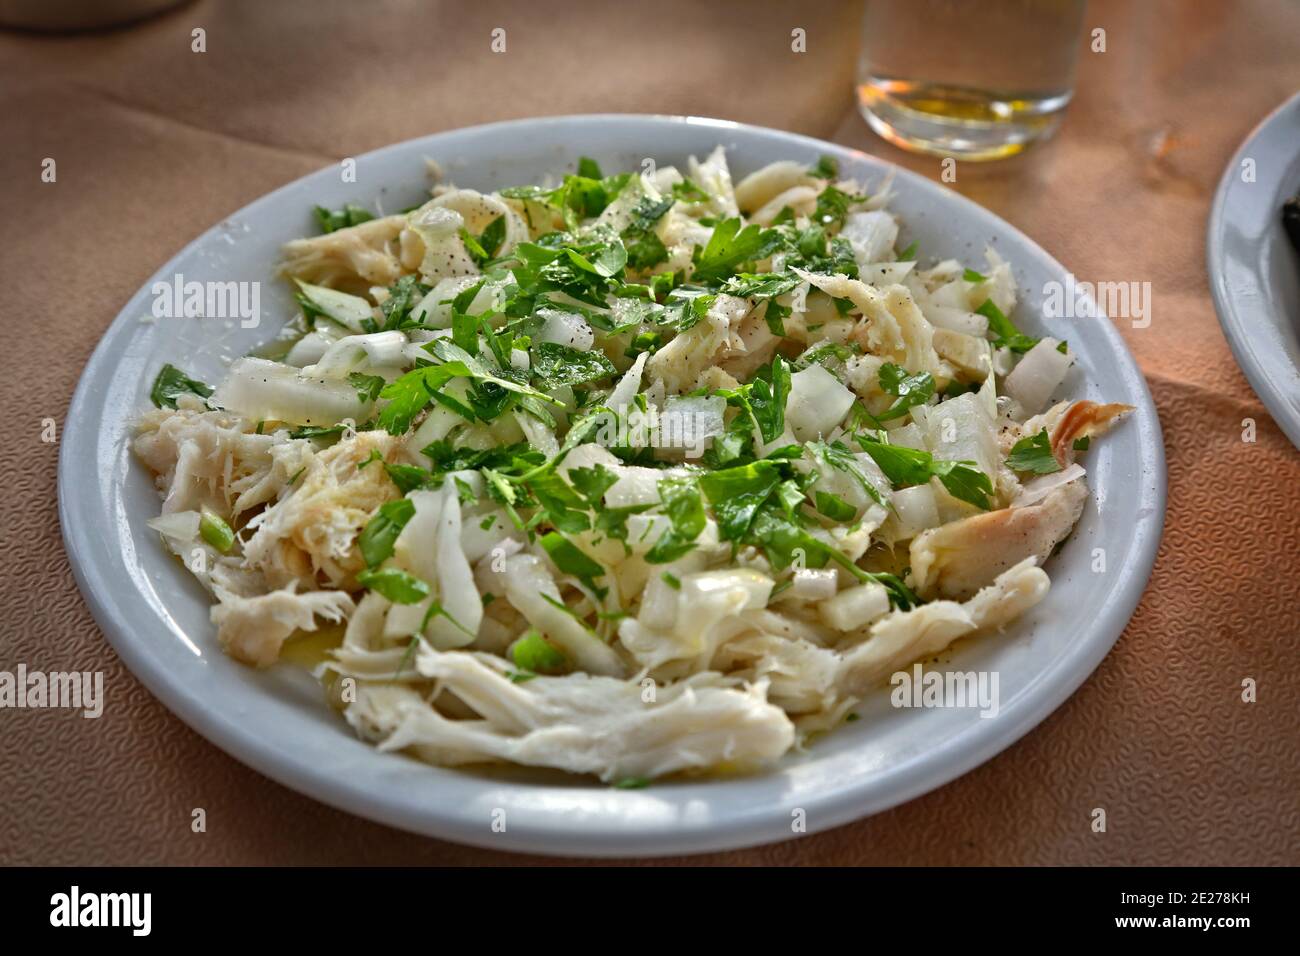 Saladuri is a delicacy common in the Cyclades islands. It is made from skate meat and vegetables and is often served as salad. Stock Photo